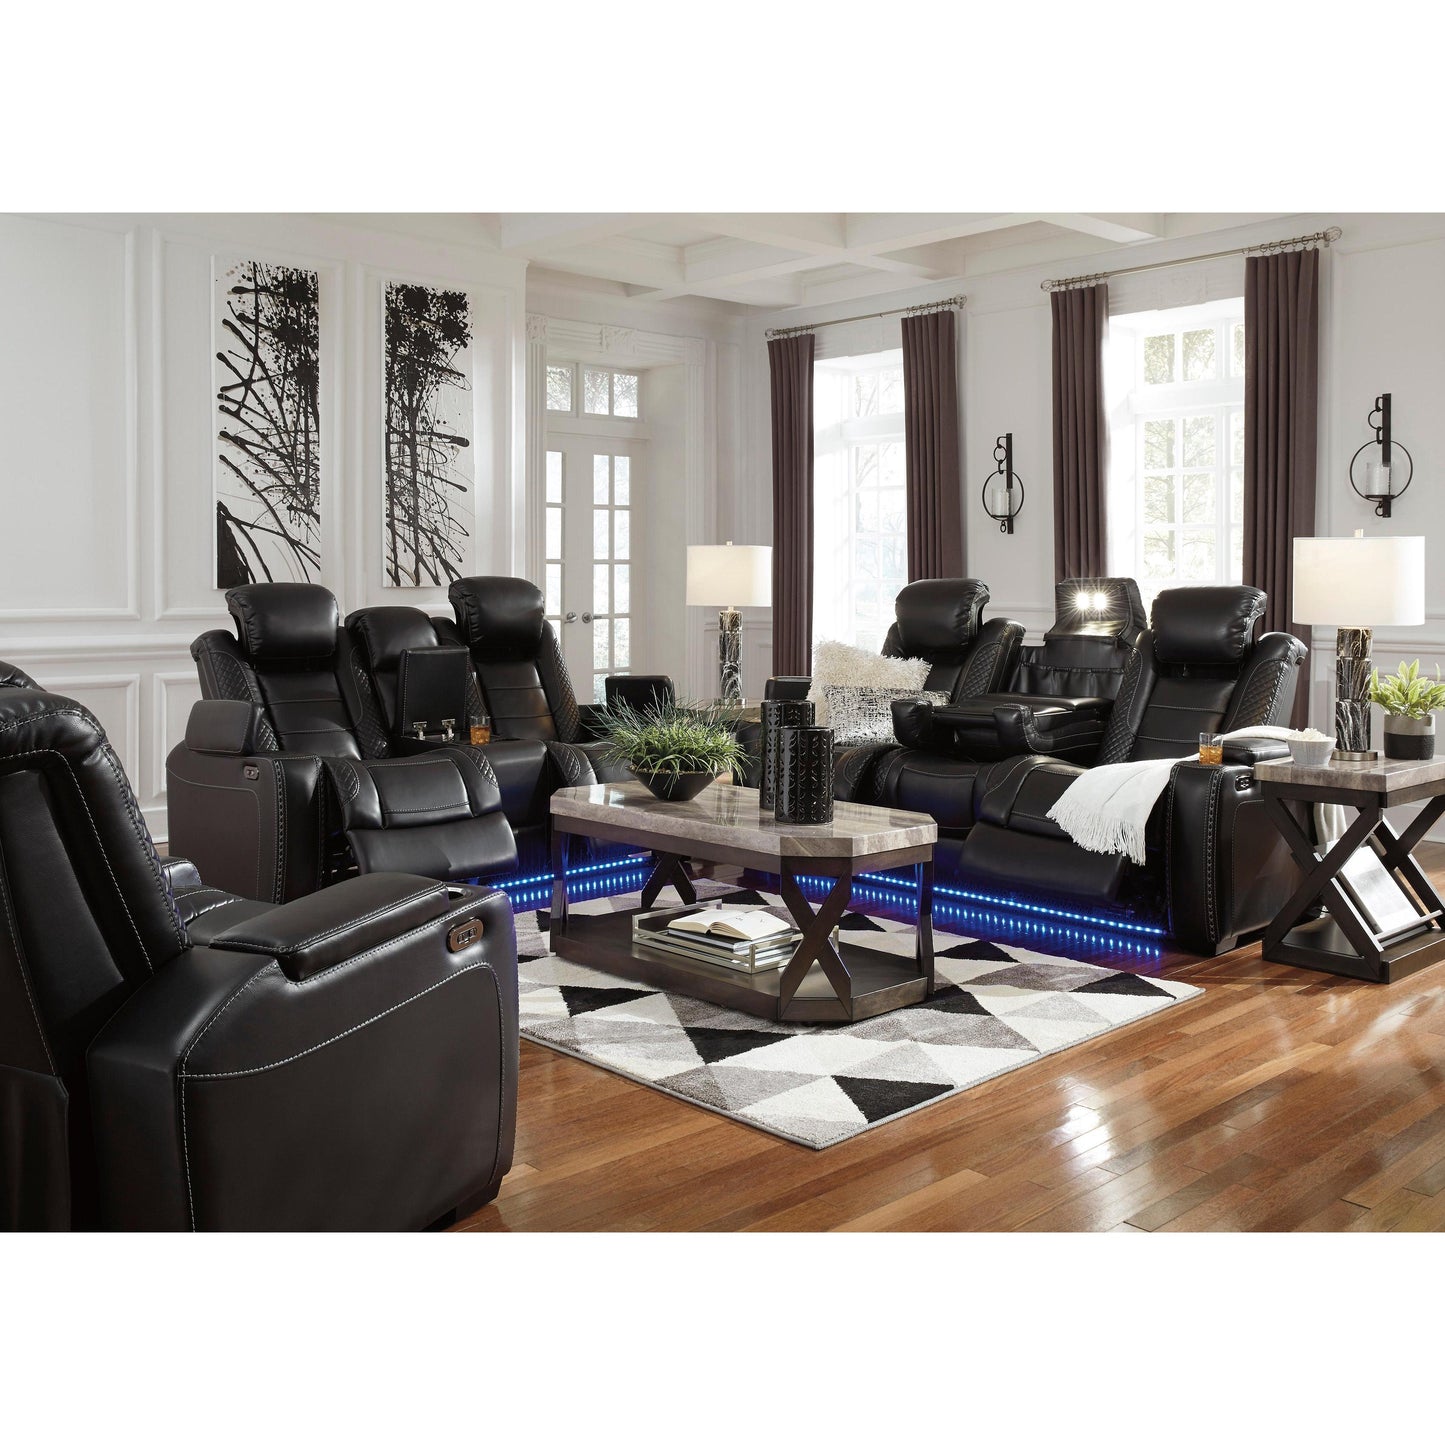 Signature Design by Ashley Party Time 37003 3 pc Power Reclining Living Room Set IMAGE 2